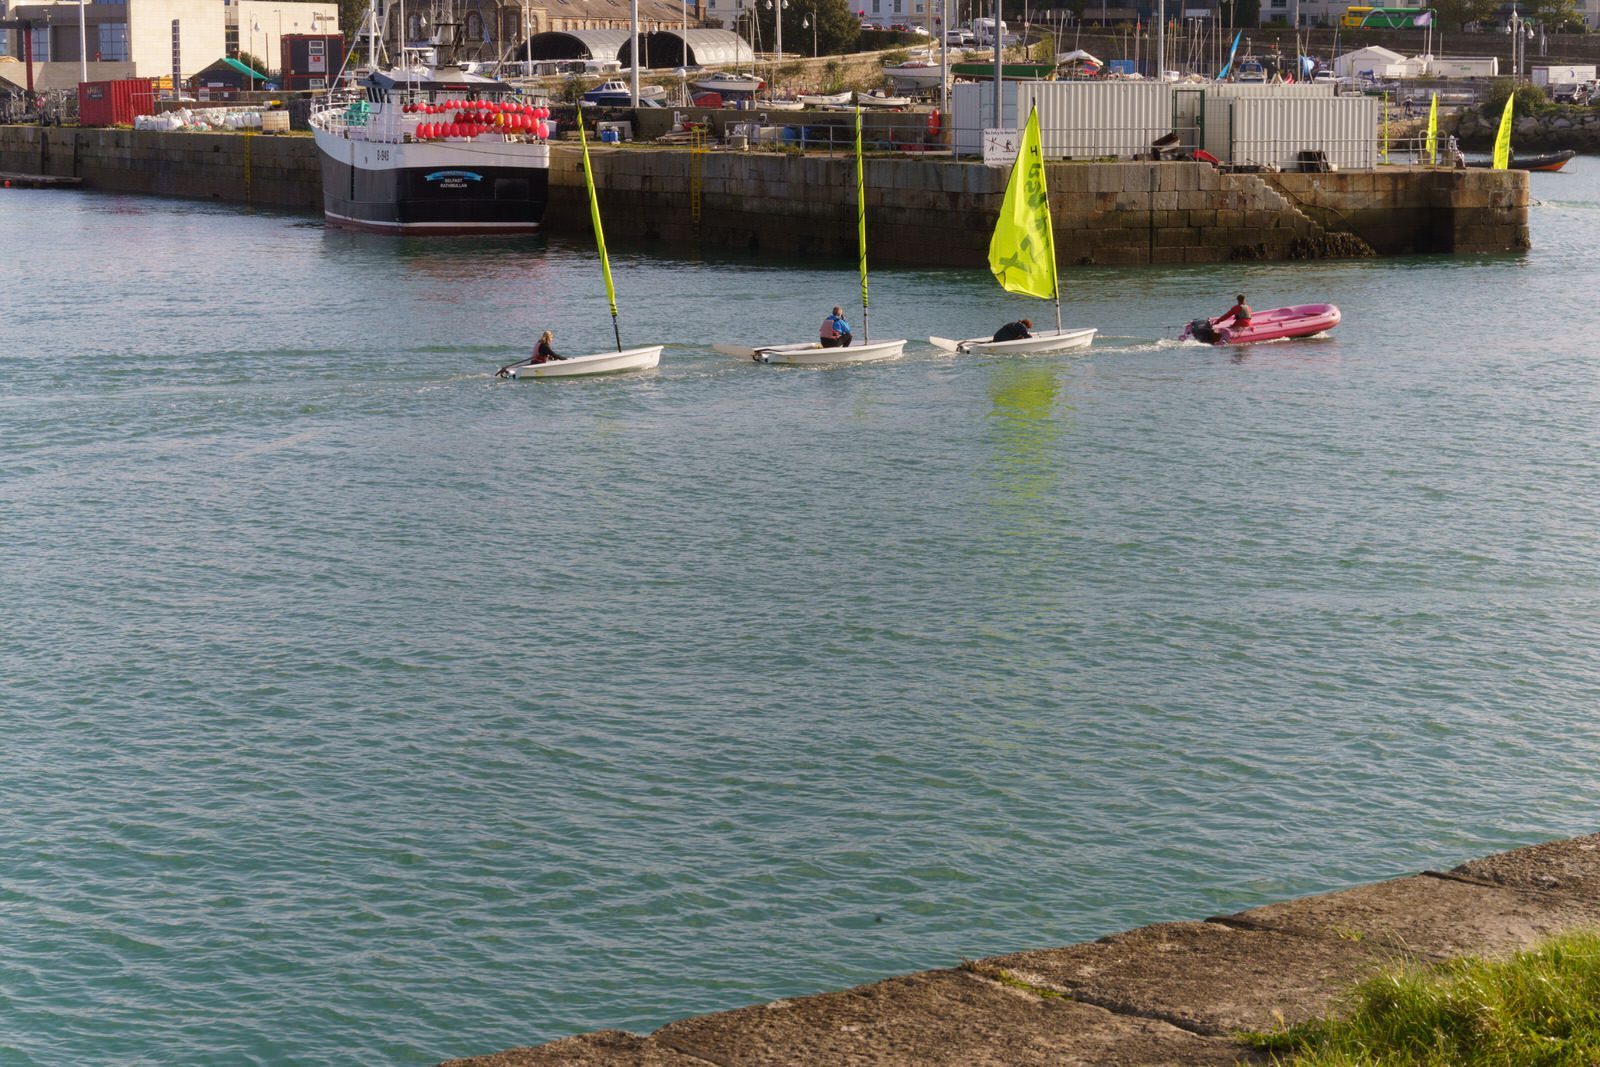 learning to sail, west pier, Dun Laoghaire,Irish National Sailing & Powerboat School,scenic venue,many amenities,Ireland, William Murphy, Sony, A7RIV, 70-20mm lens, 005